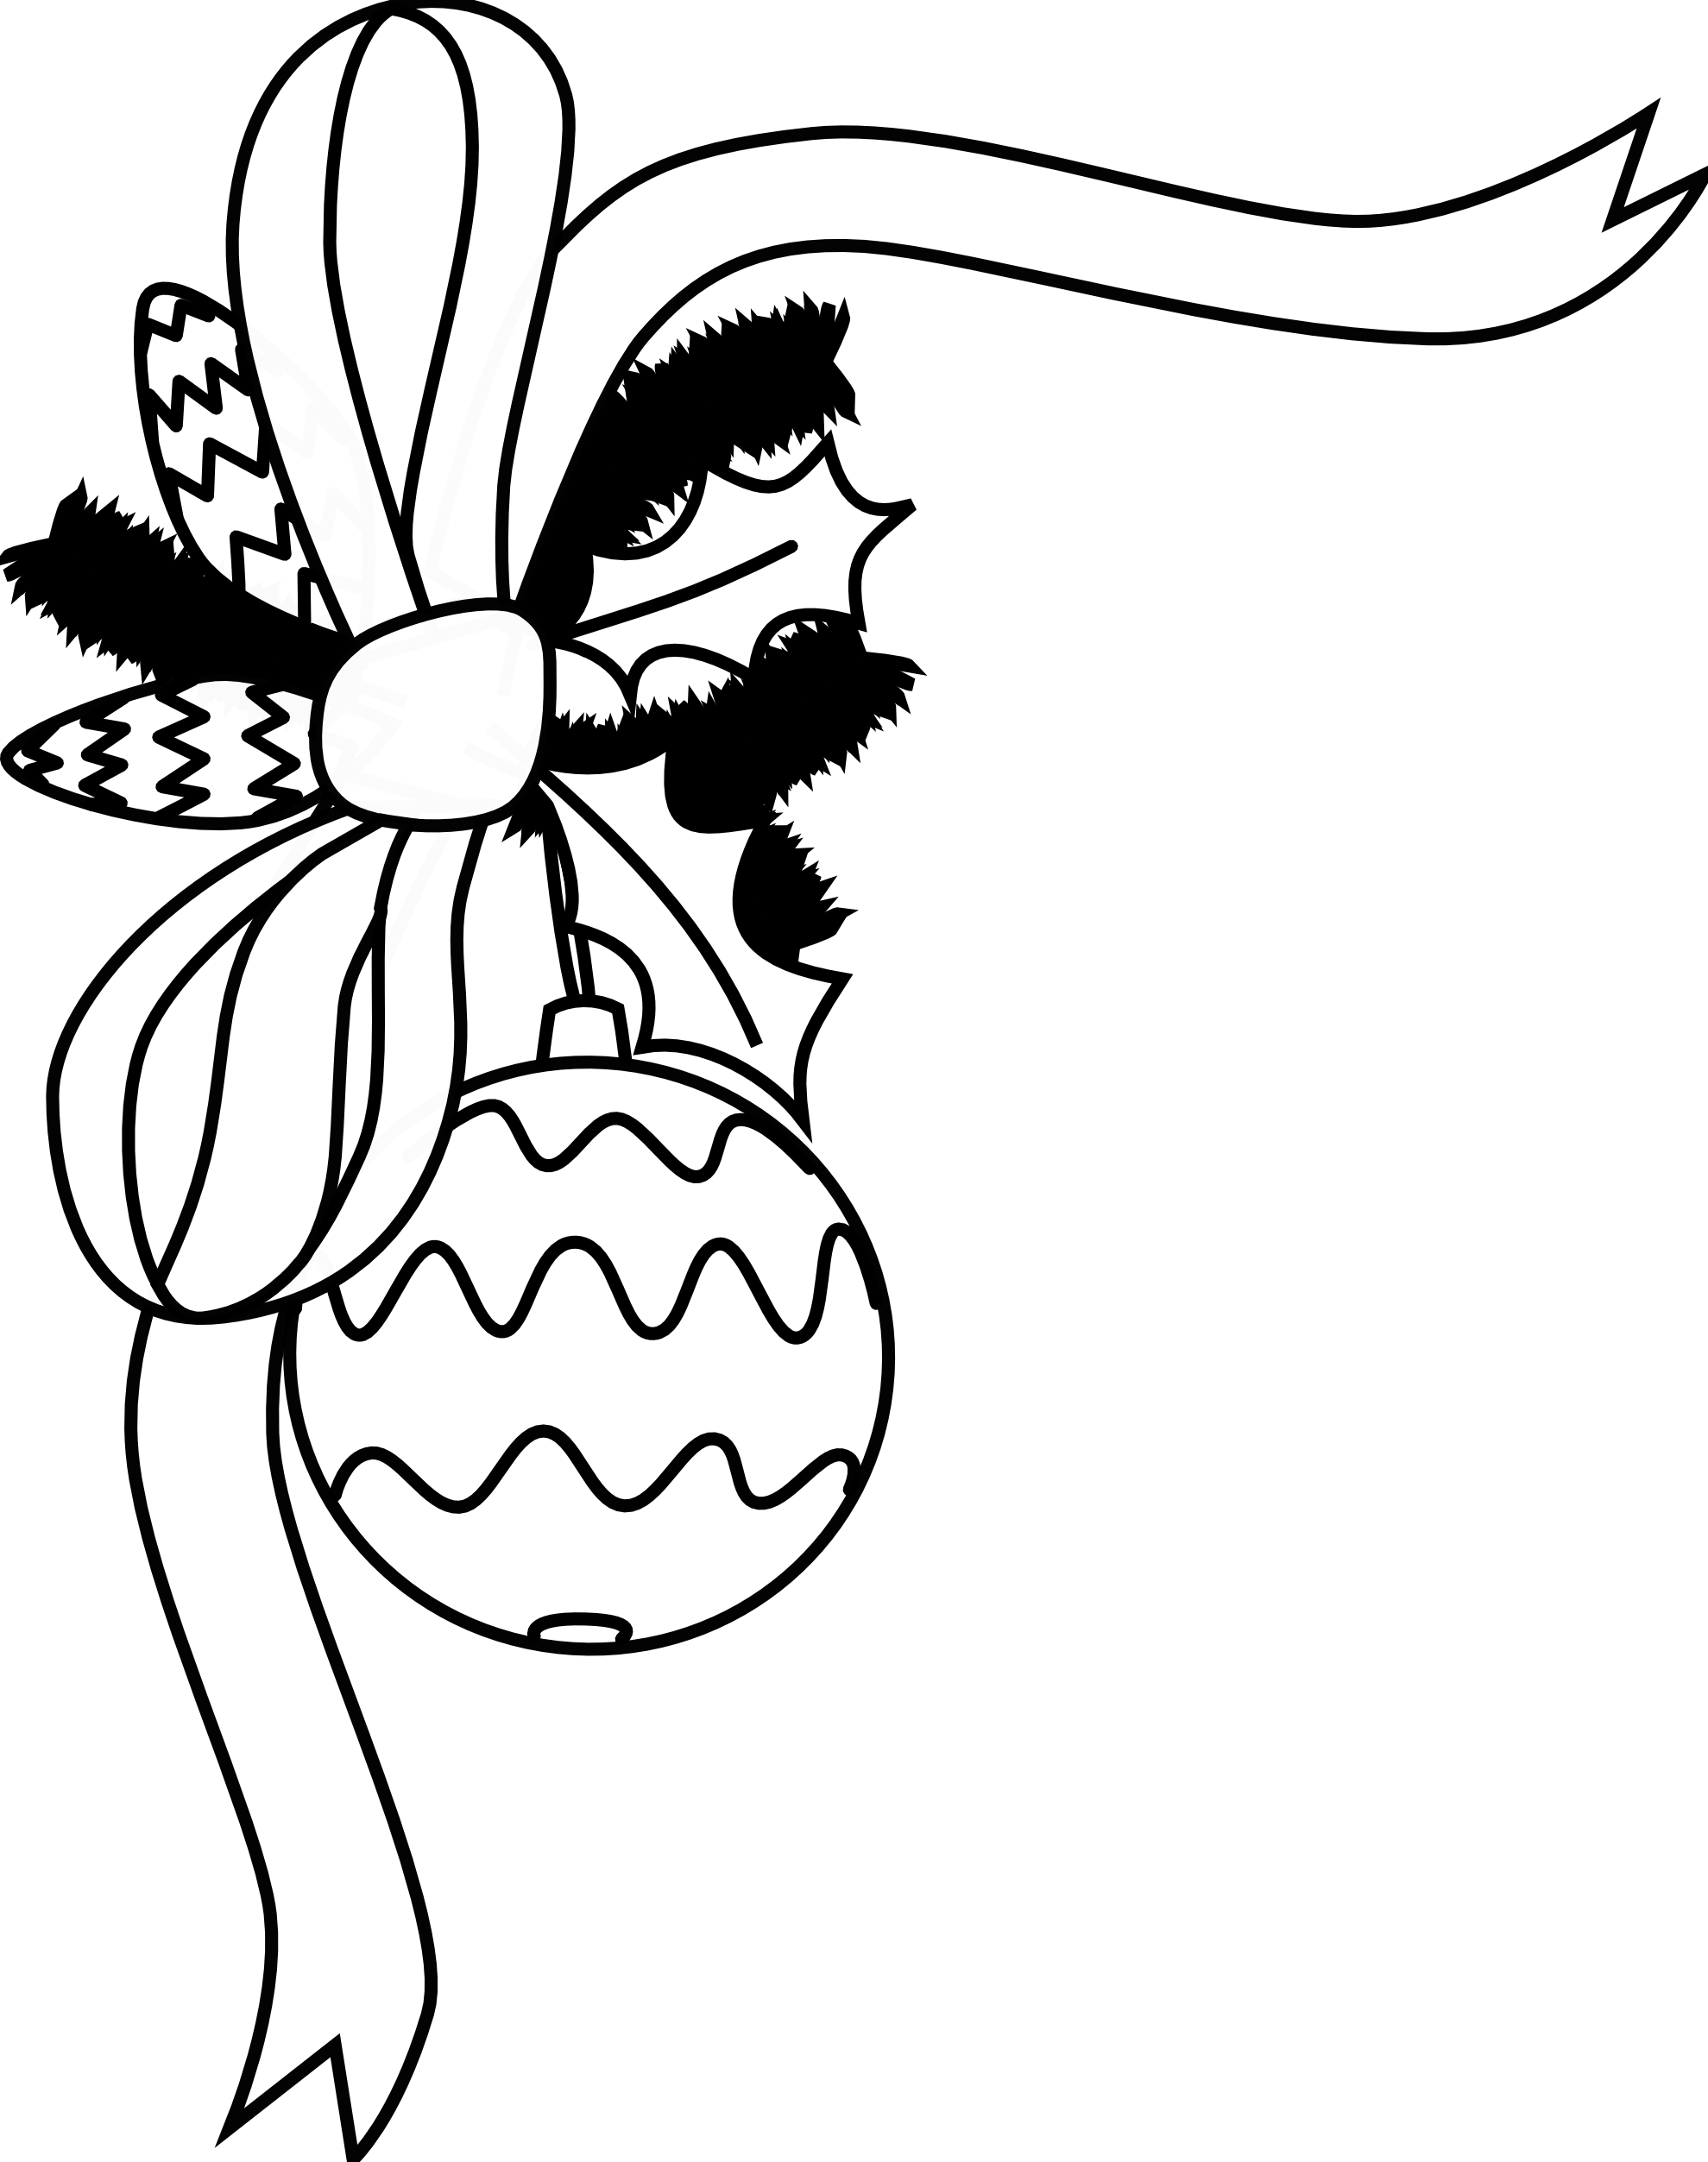 Peace Sign Clipart Black And White   Clipart Panda   Free Clipart